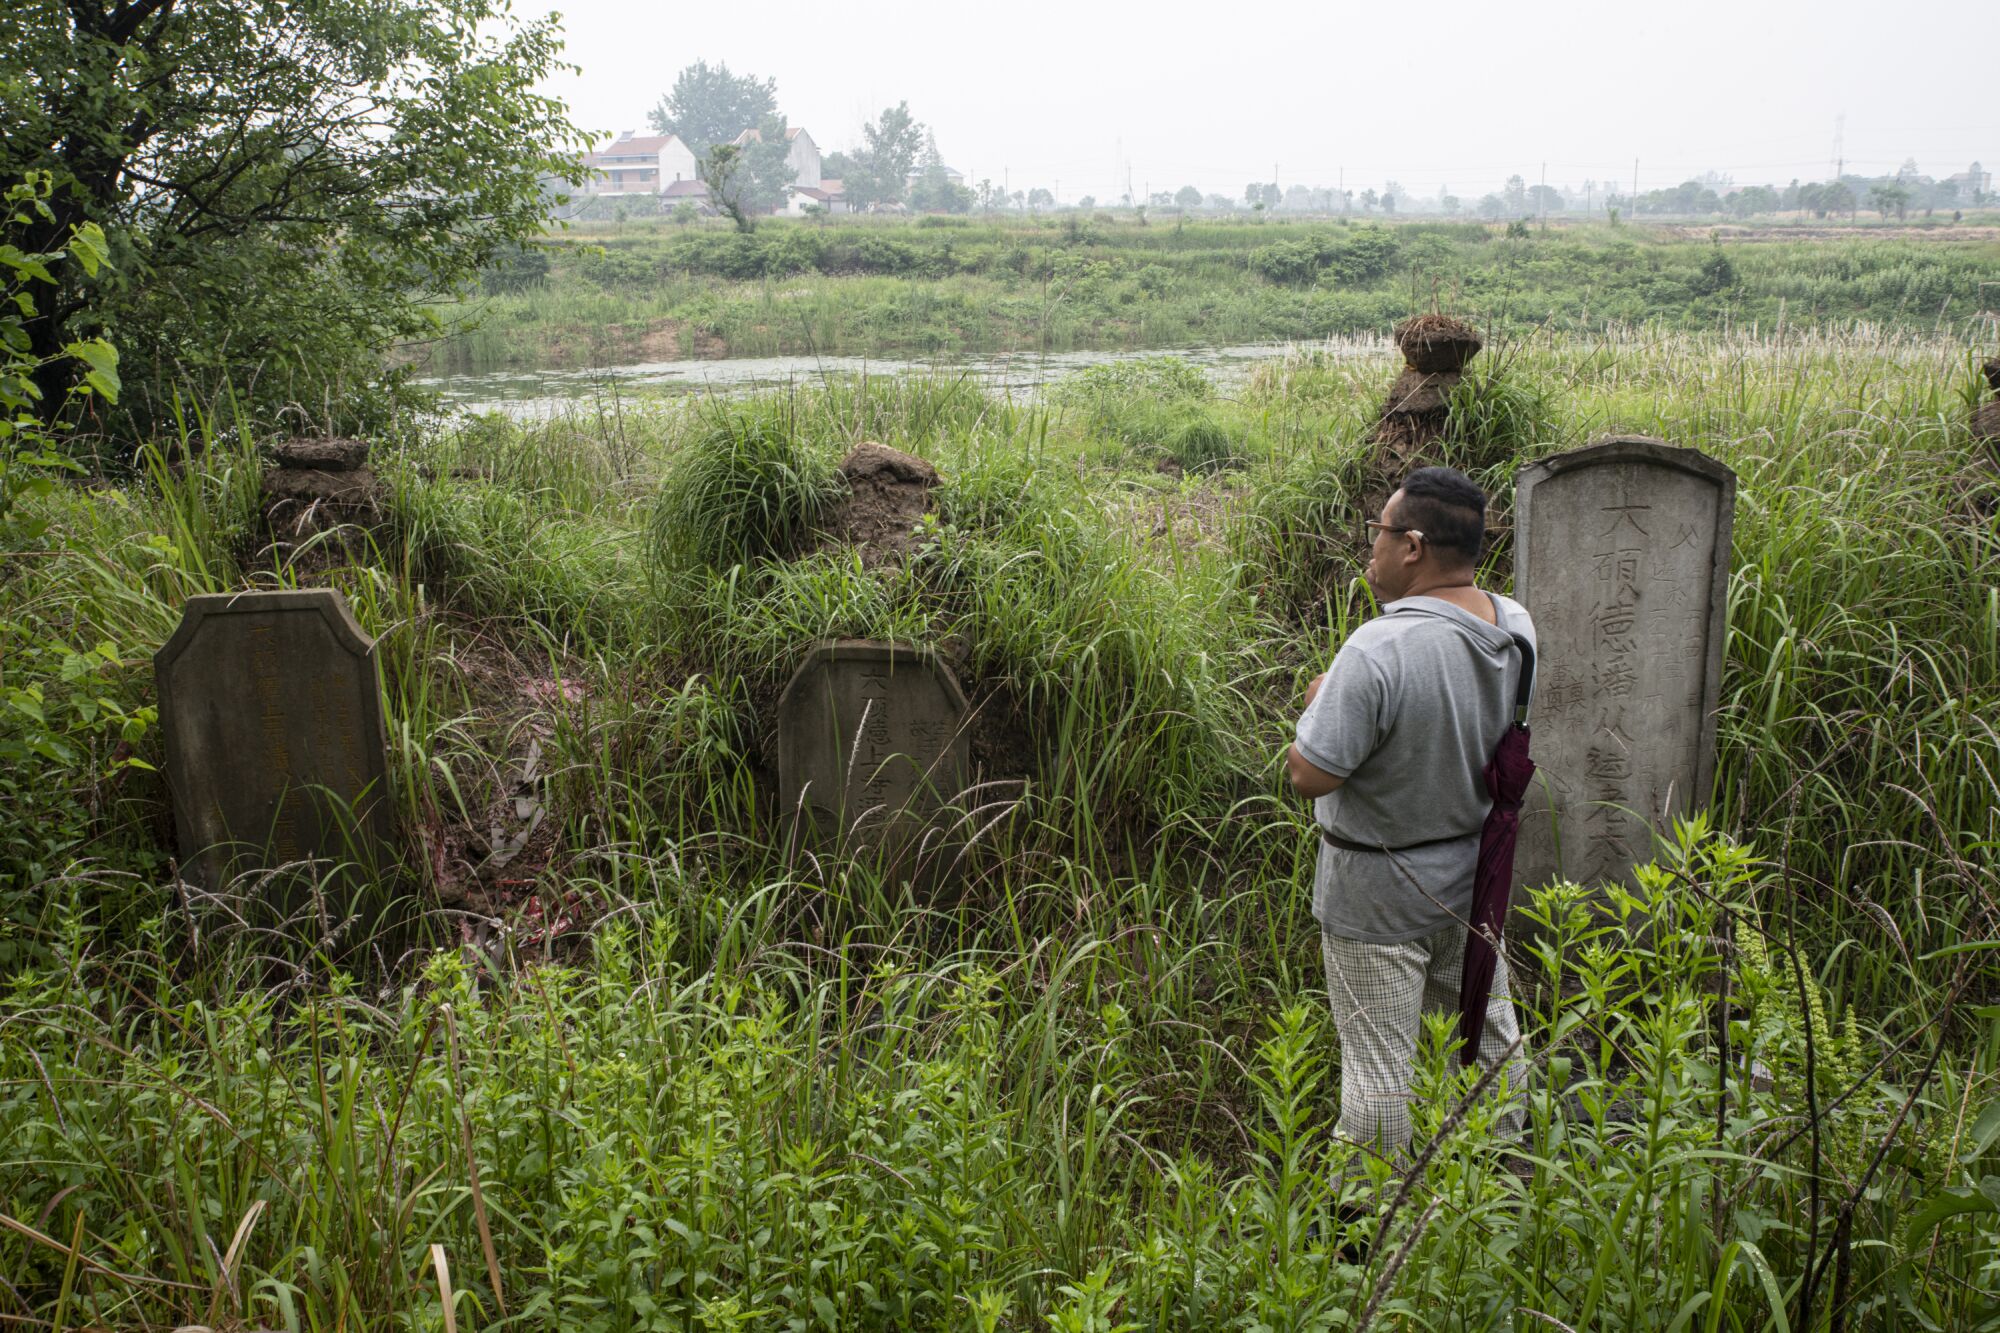 Pan Bangfeng looks at his ancestors' graves on what was once a plot of family farmland.